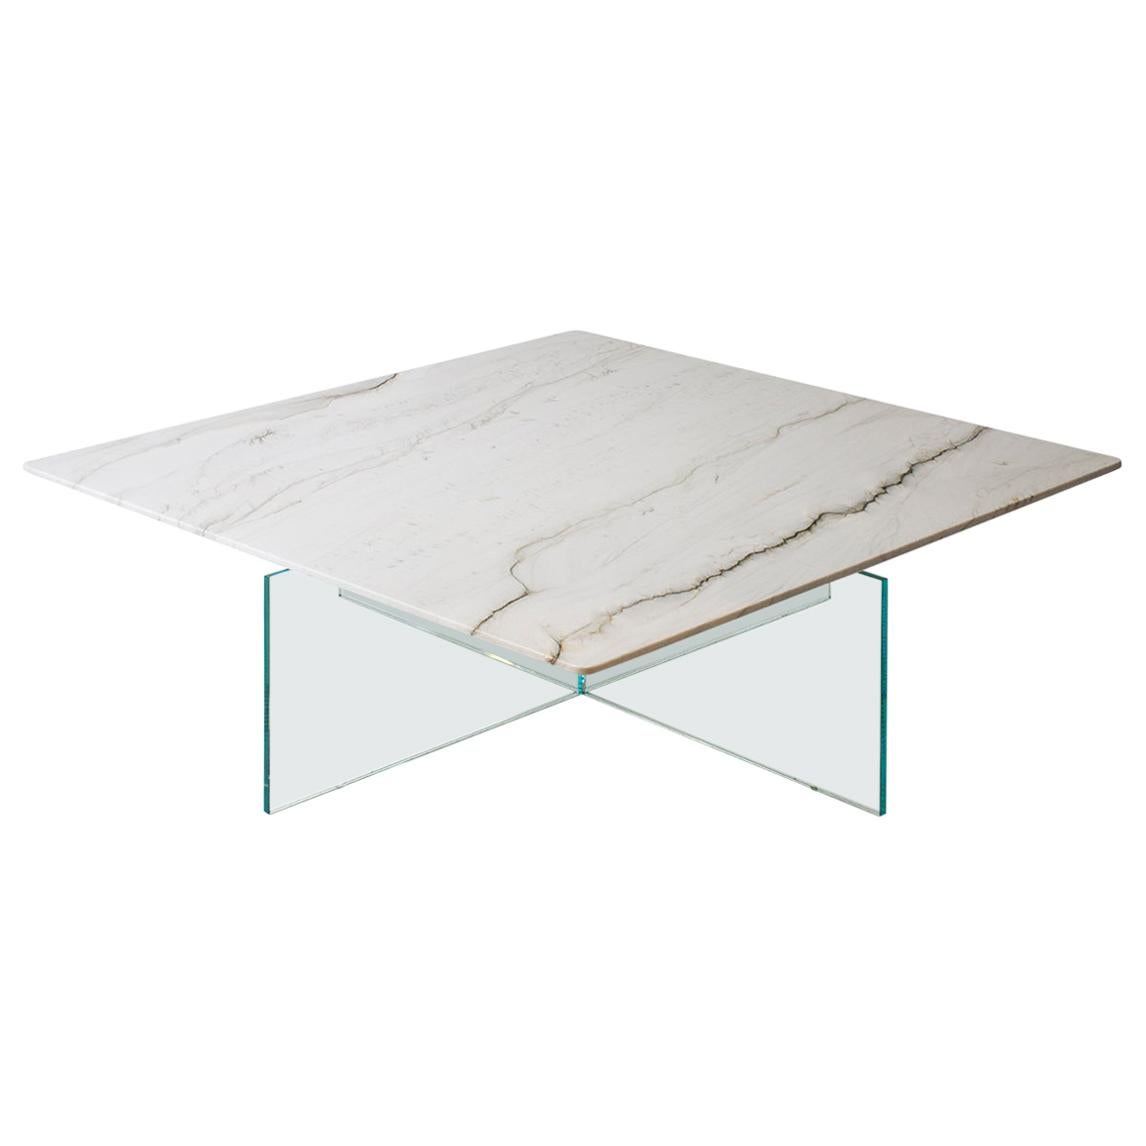 Claste beside Myself Small Coffee Table in Carrara Classico Marble & Glass Base